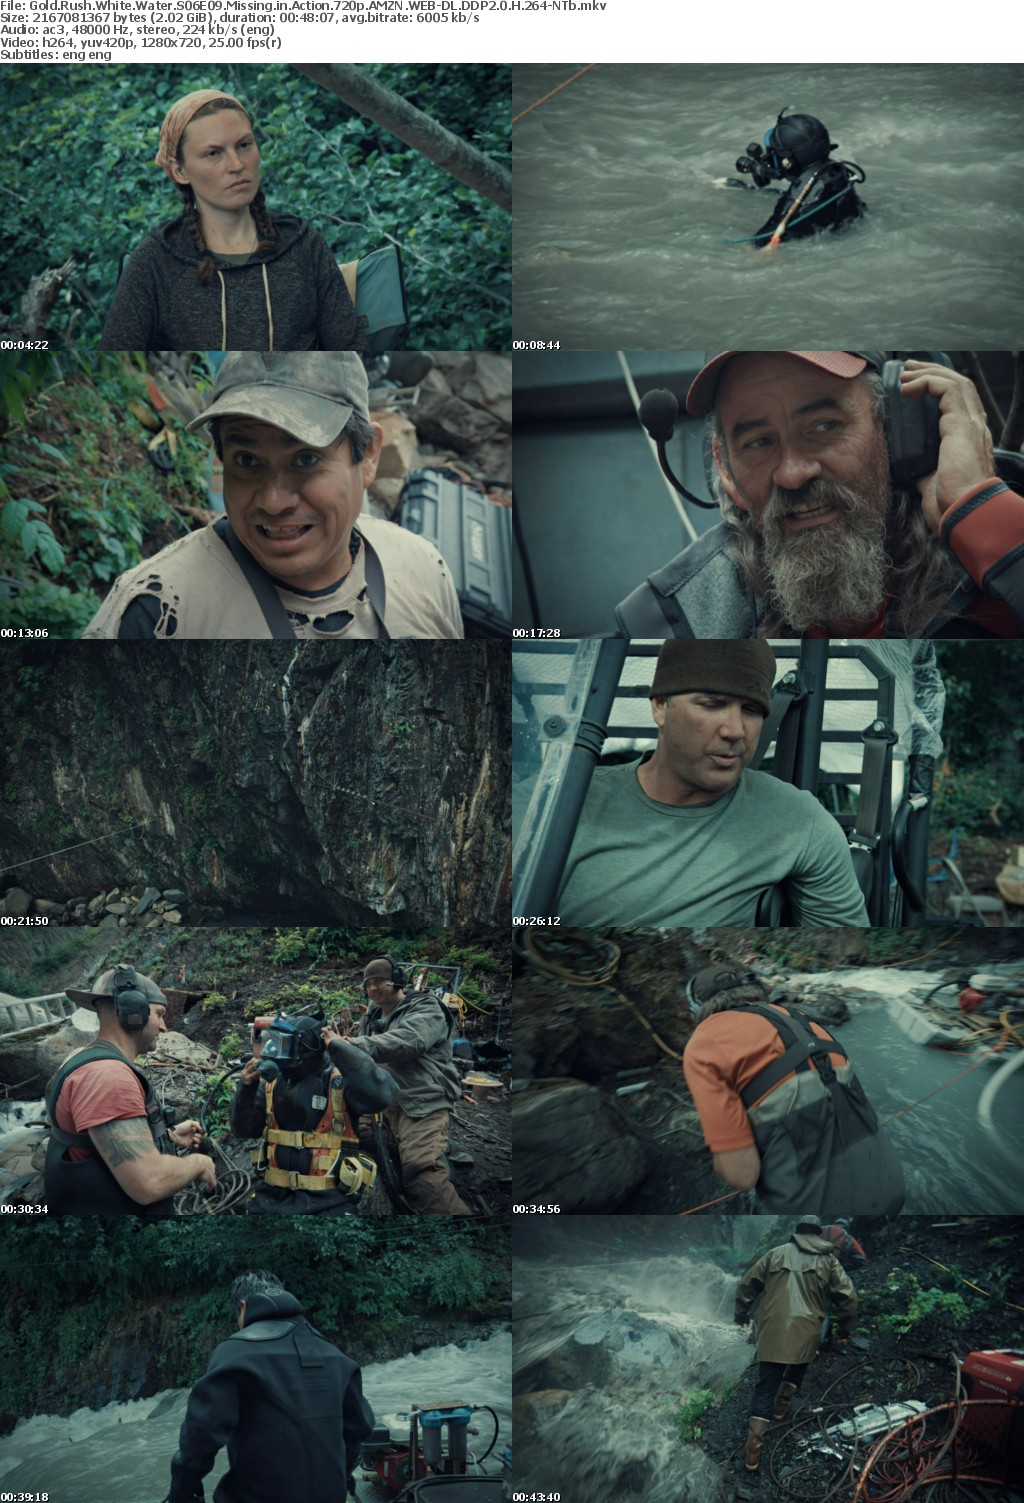 Gold Rush White Water S06E09 Missing in Action 720p AMZN WEBRip DDP2 0 x264-NTb